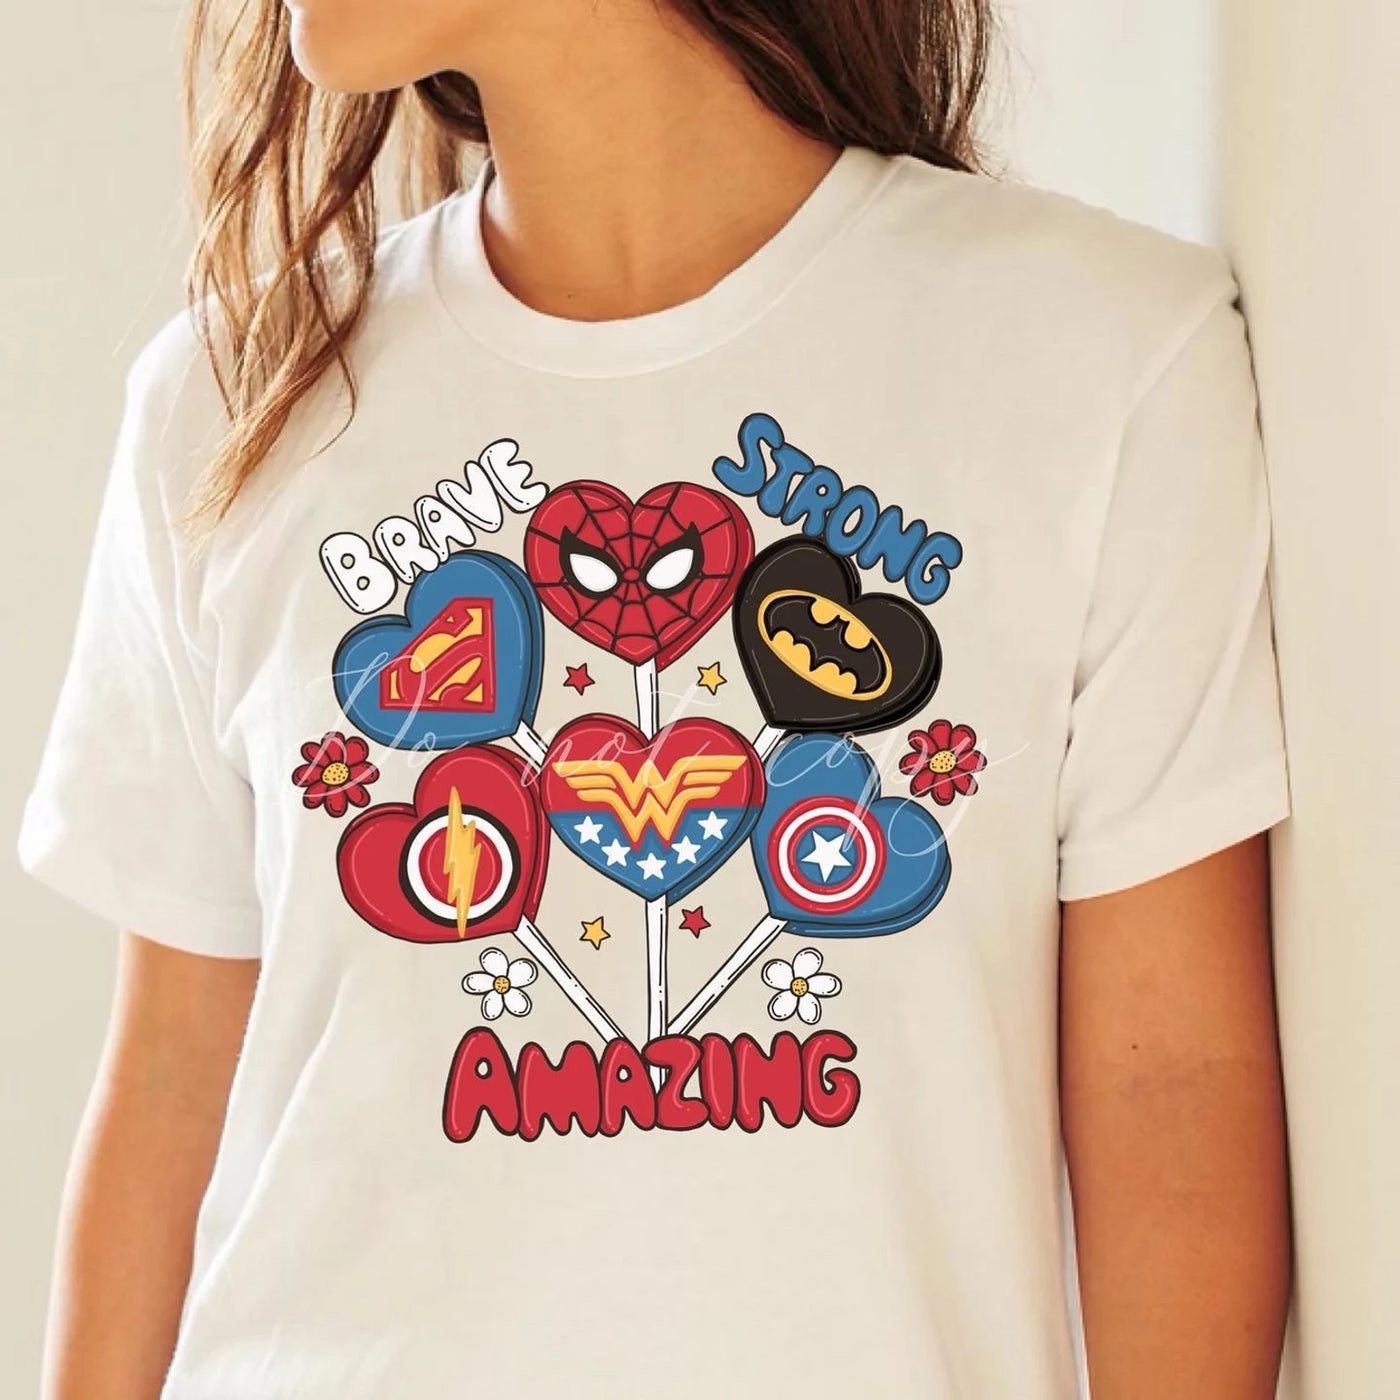 Mommy-and-Me "Superhero Affirmations" Adult or Toddler/Youth T-shirt (shown on "Natural")